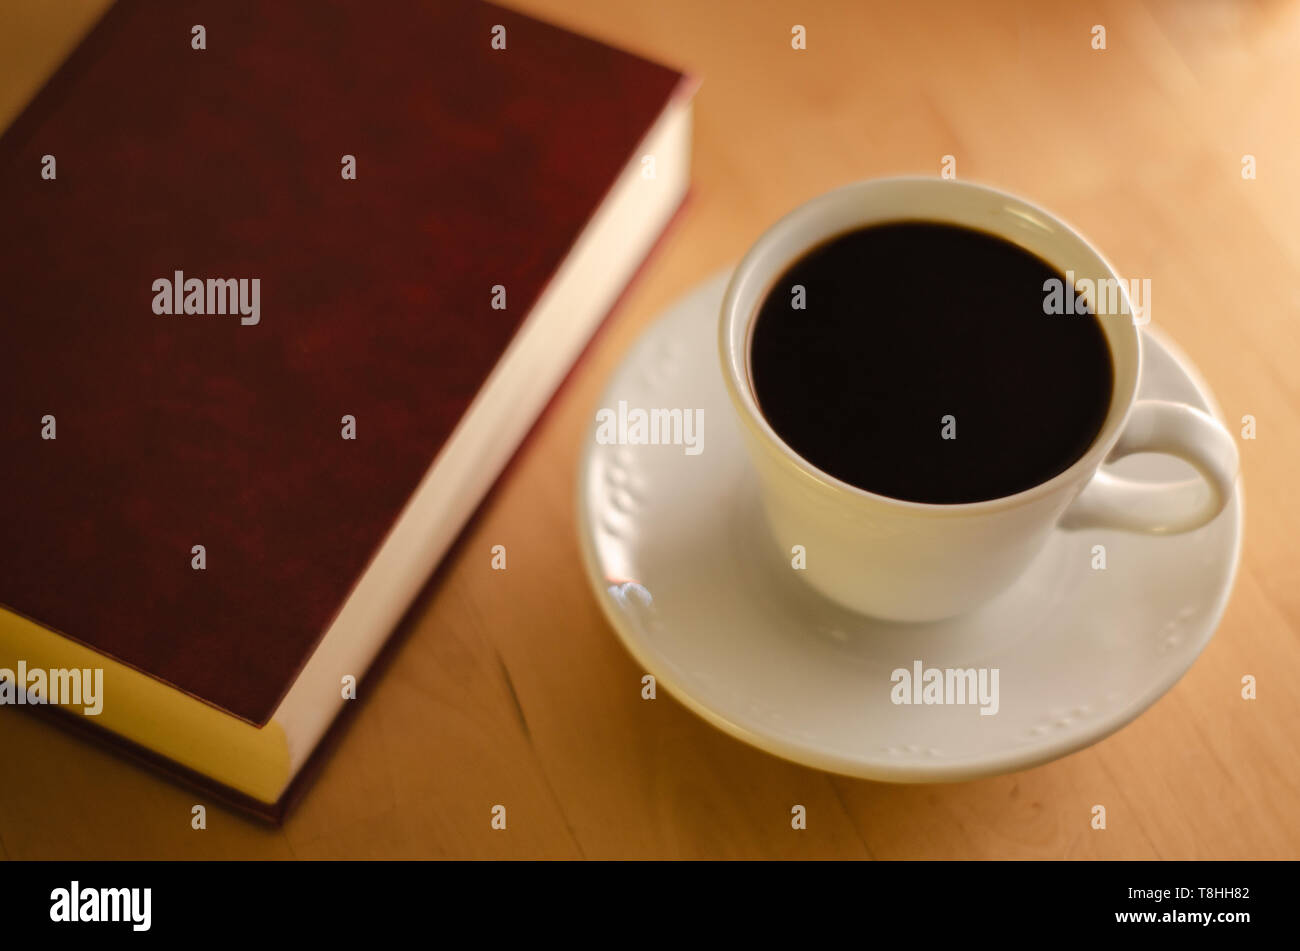 Closed book with a blank cover next to a full cup of coffee on a wooden table. Stock Photo